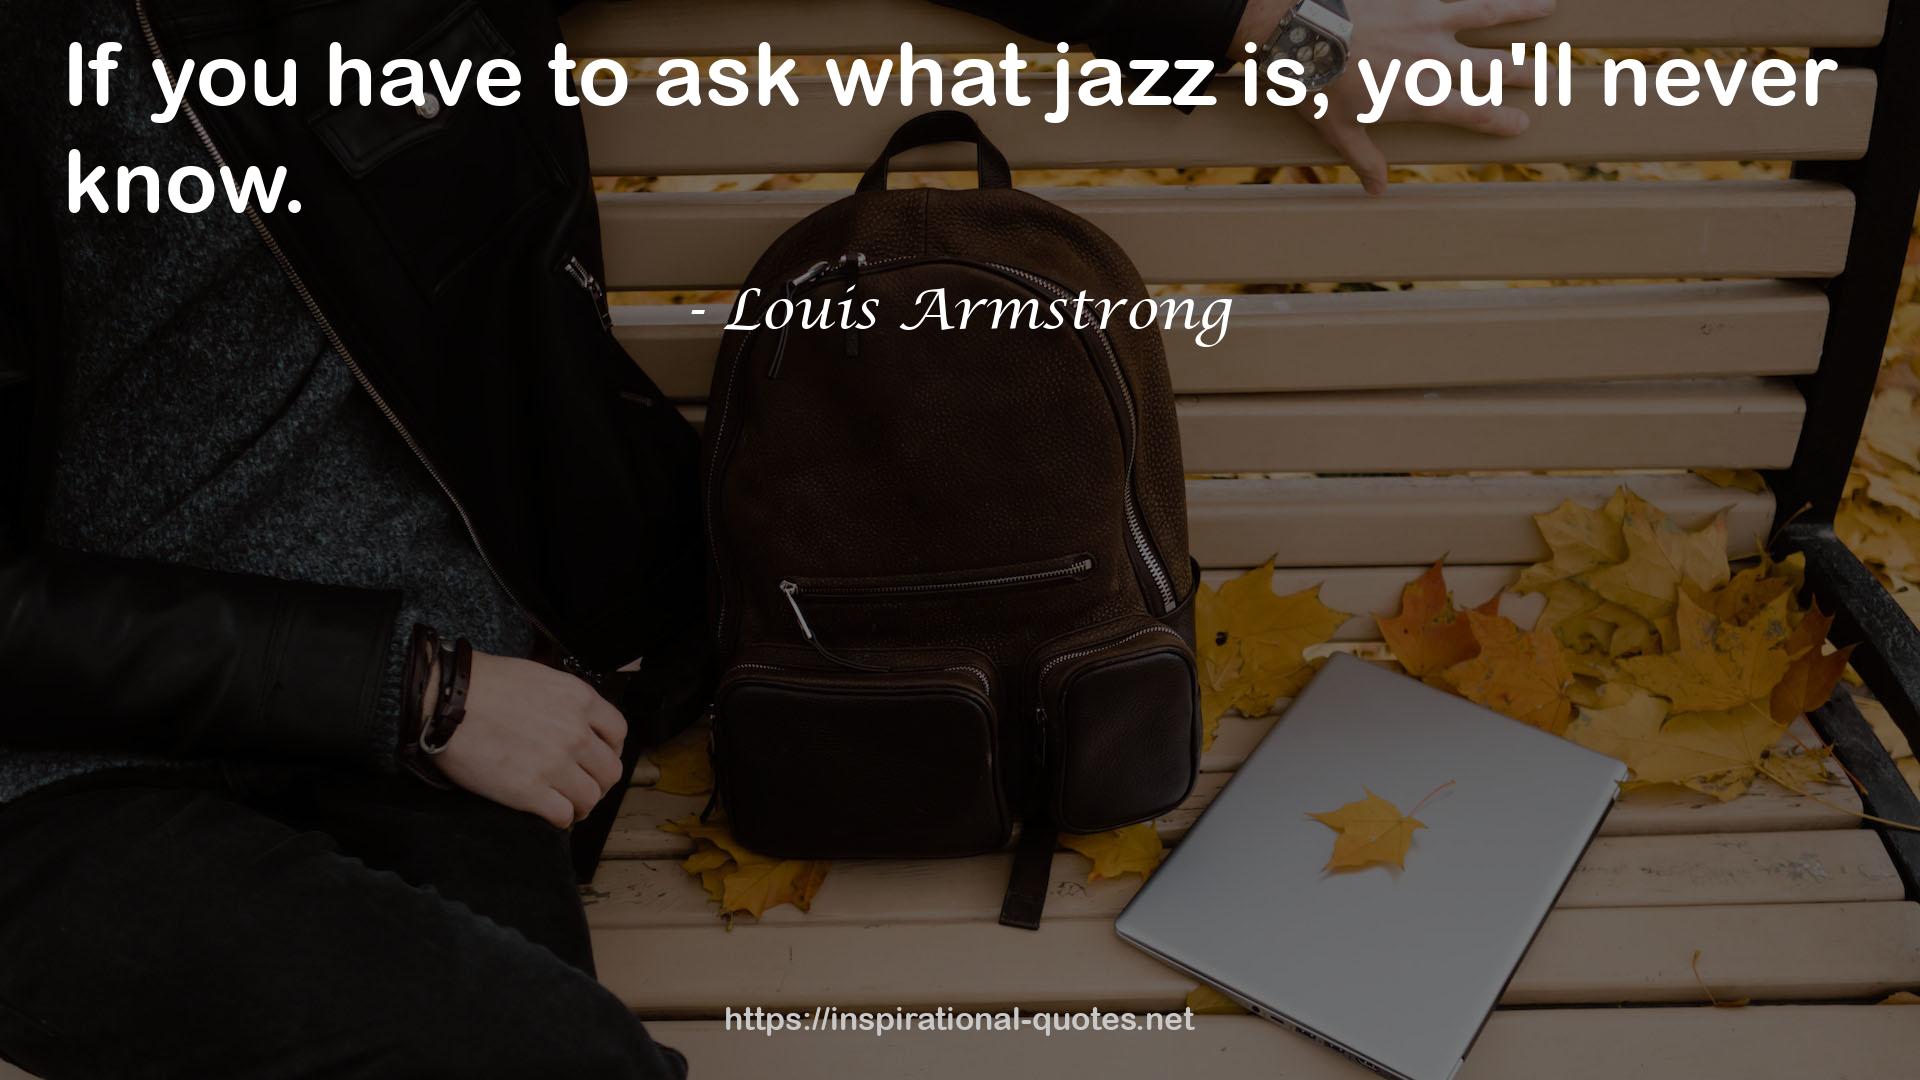 Louis Armstrong QUOTES